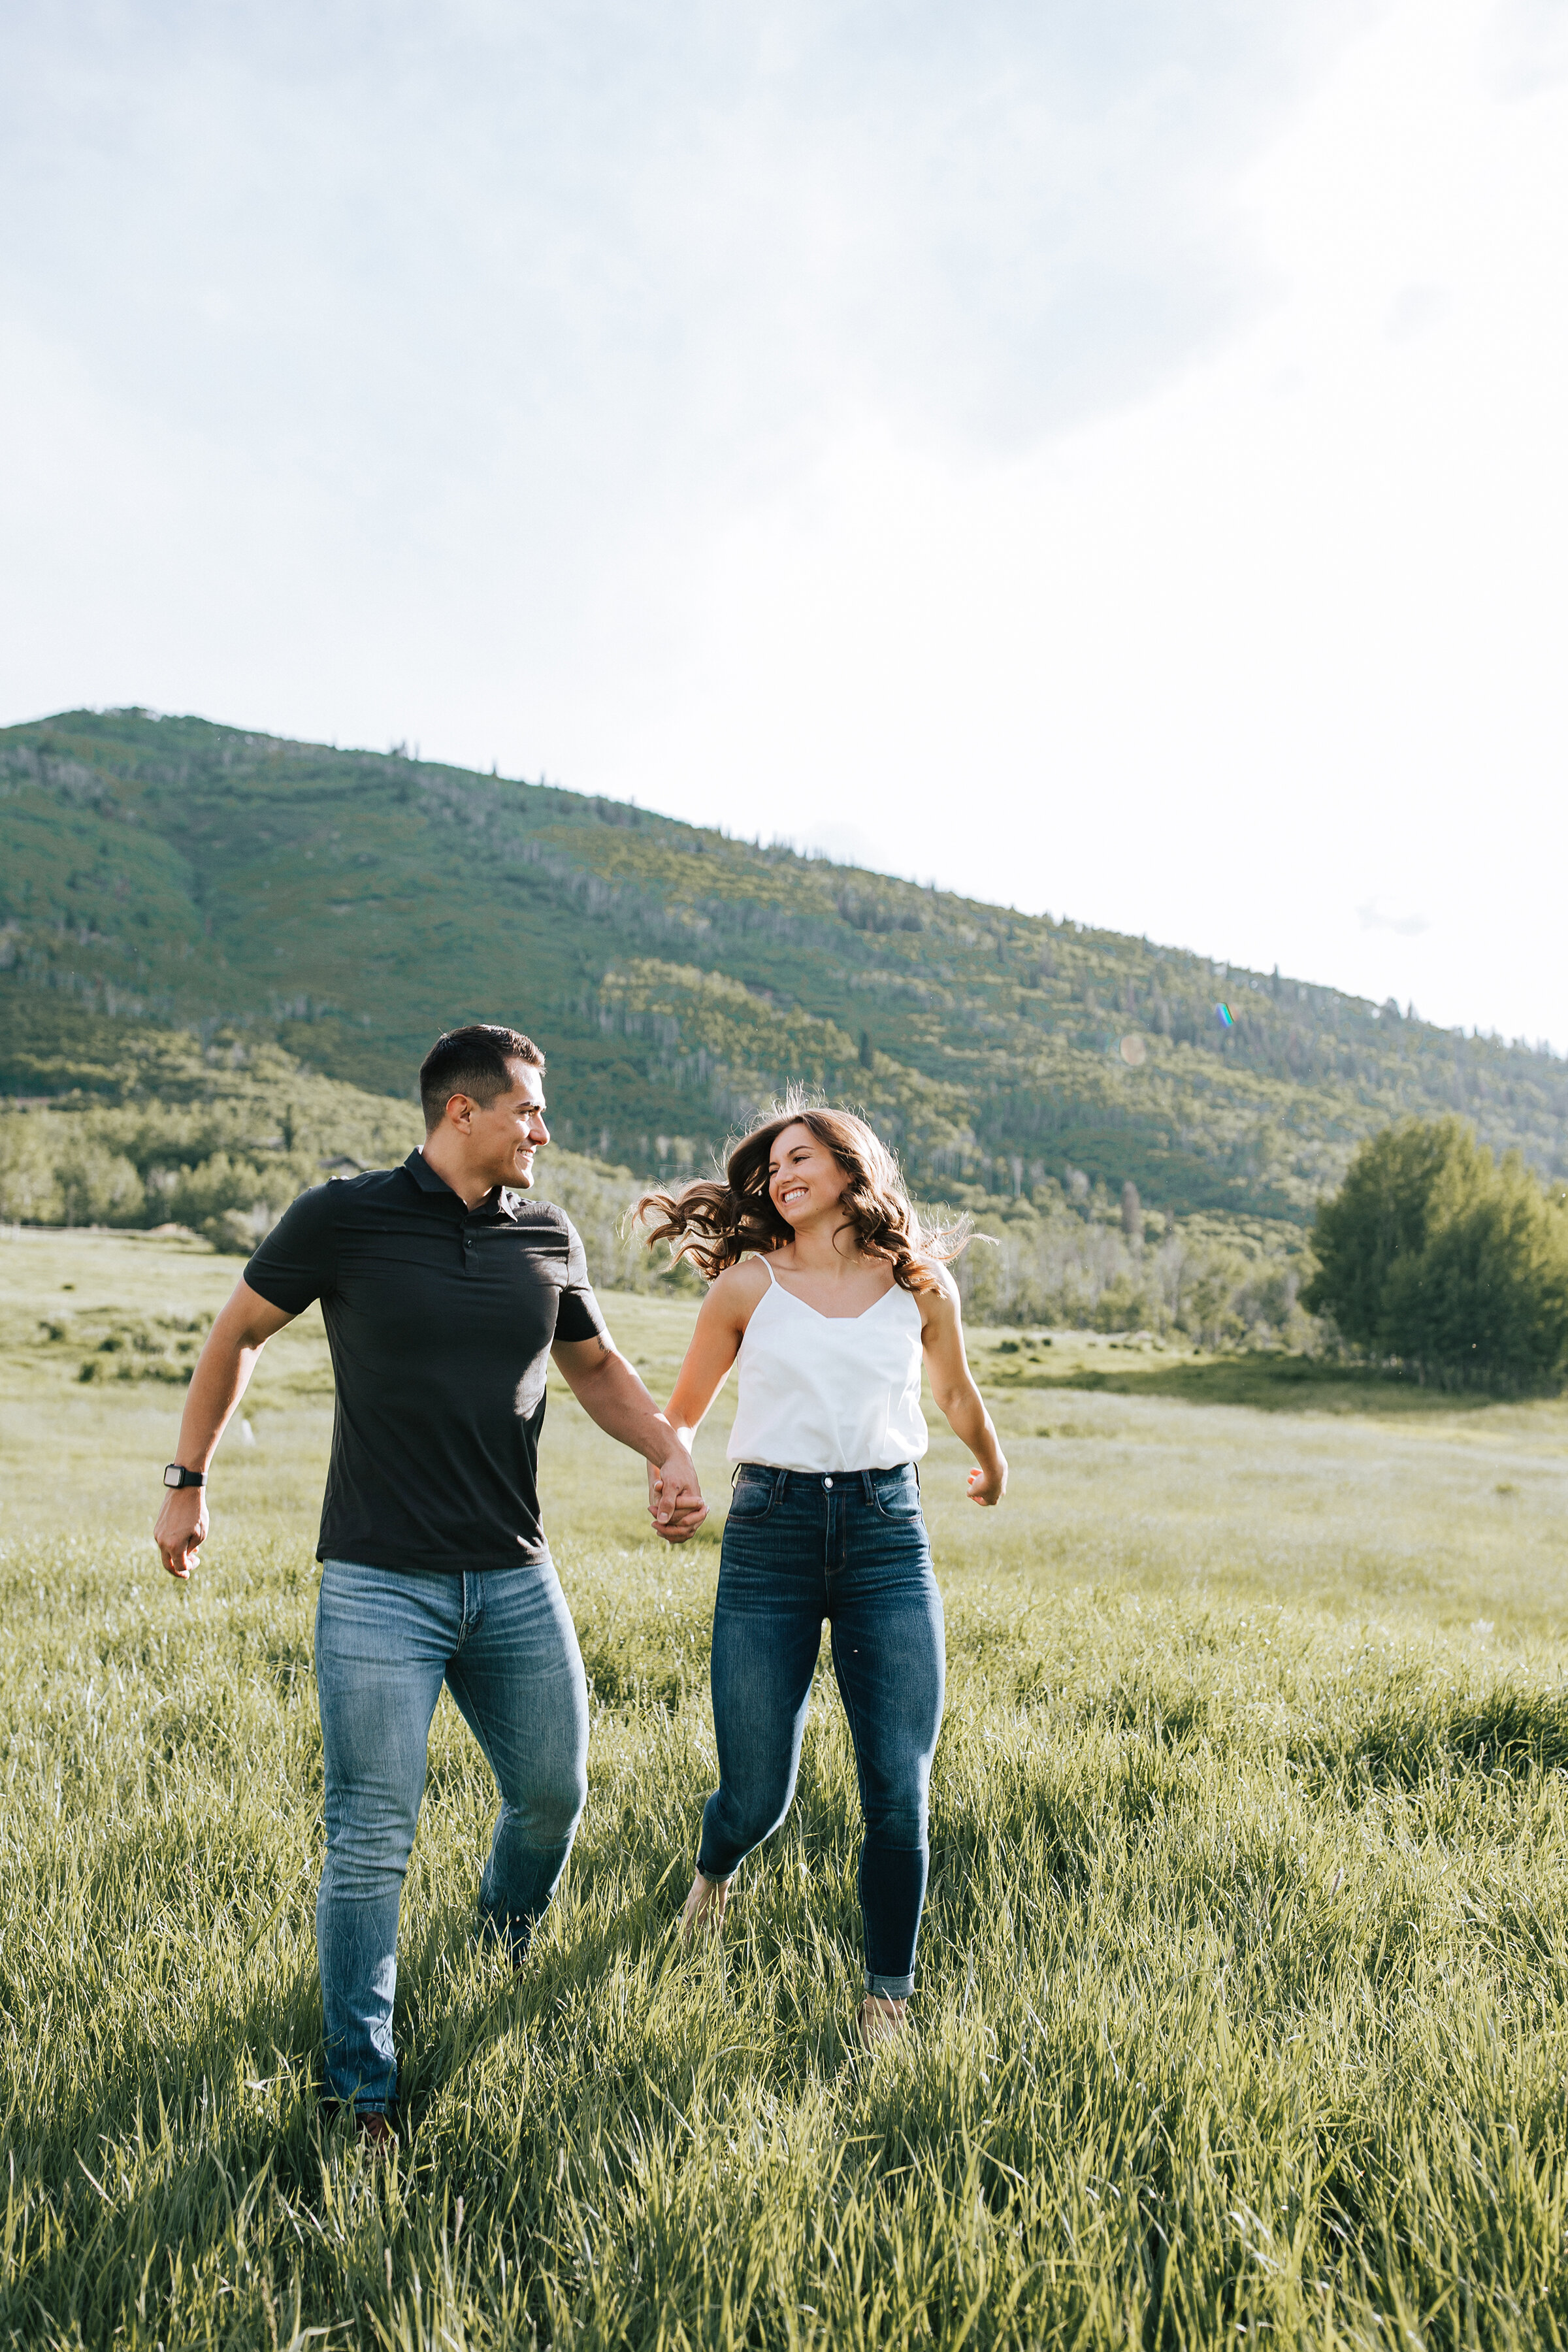  A newly wed couple run through a grassy hill top in a beautiful bright honeymoon couples photo shoot. Casual client attire for a honeymoon photo shoot photo shoot inspiration ideas and goals couple goals couple pose inspiration ideas and goals outdo